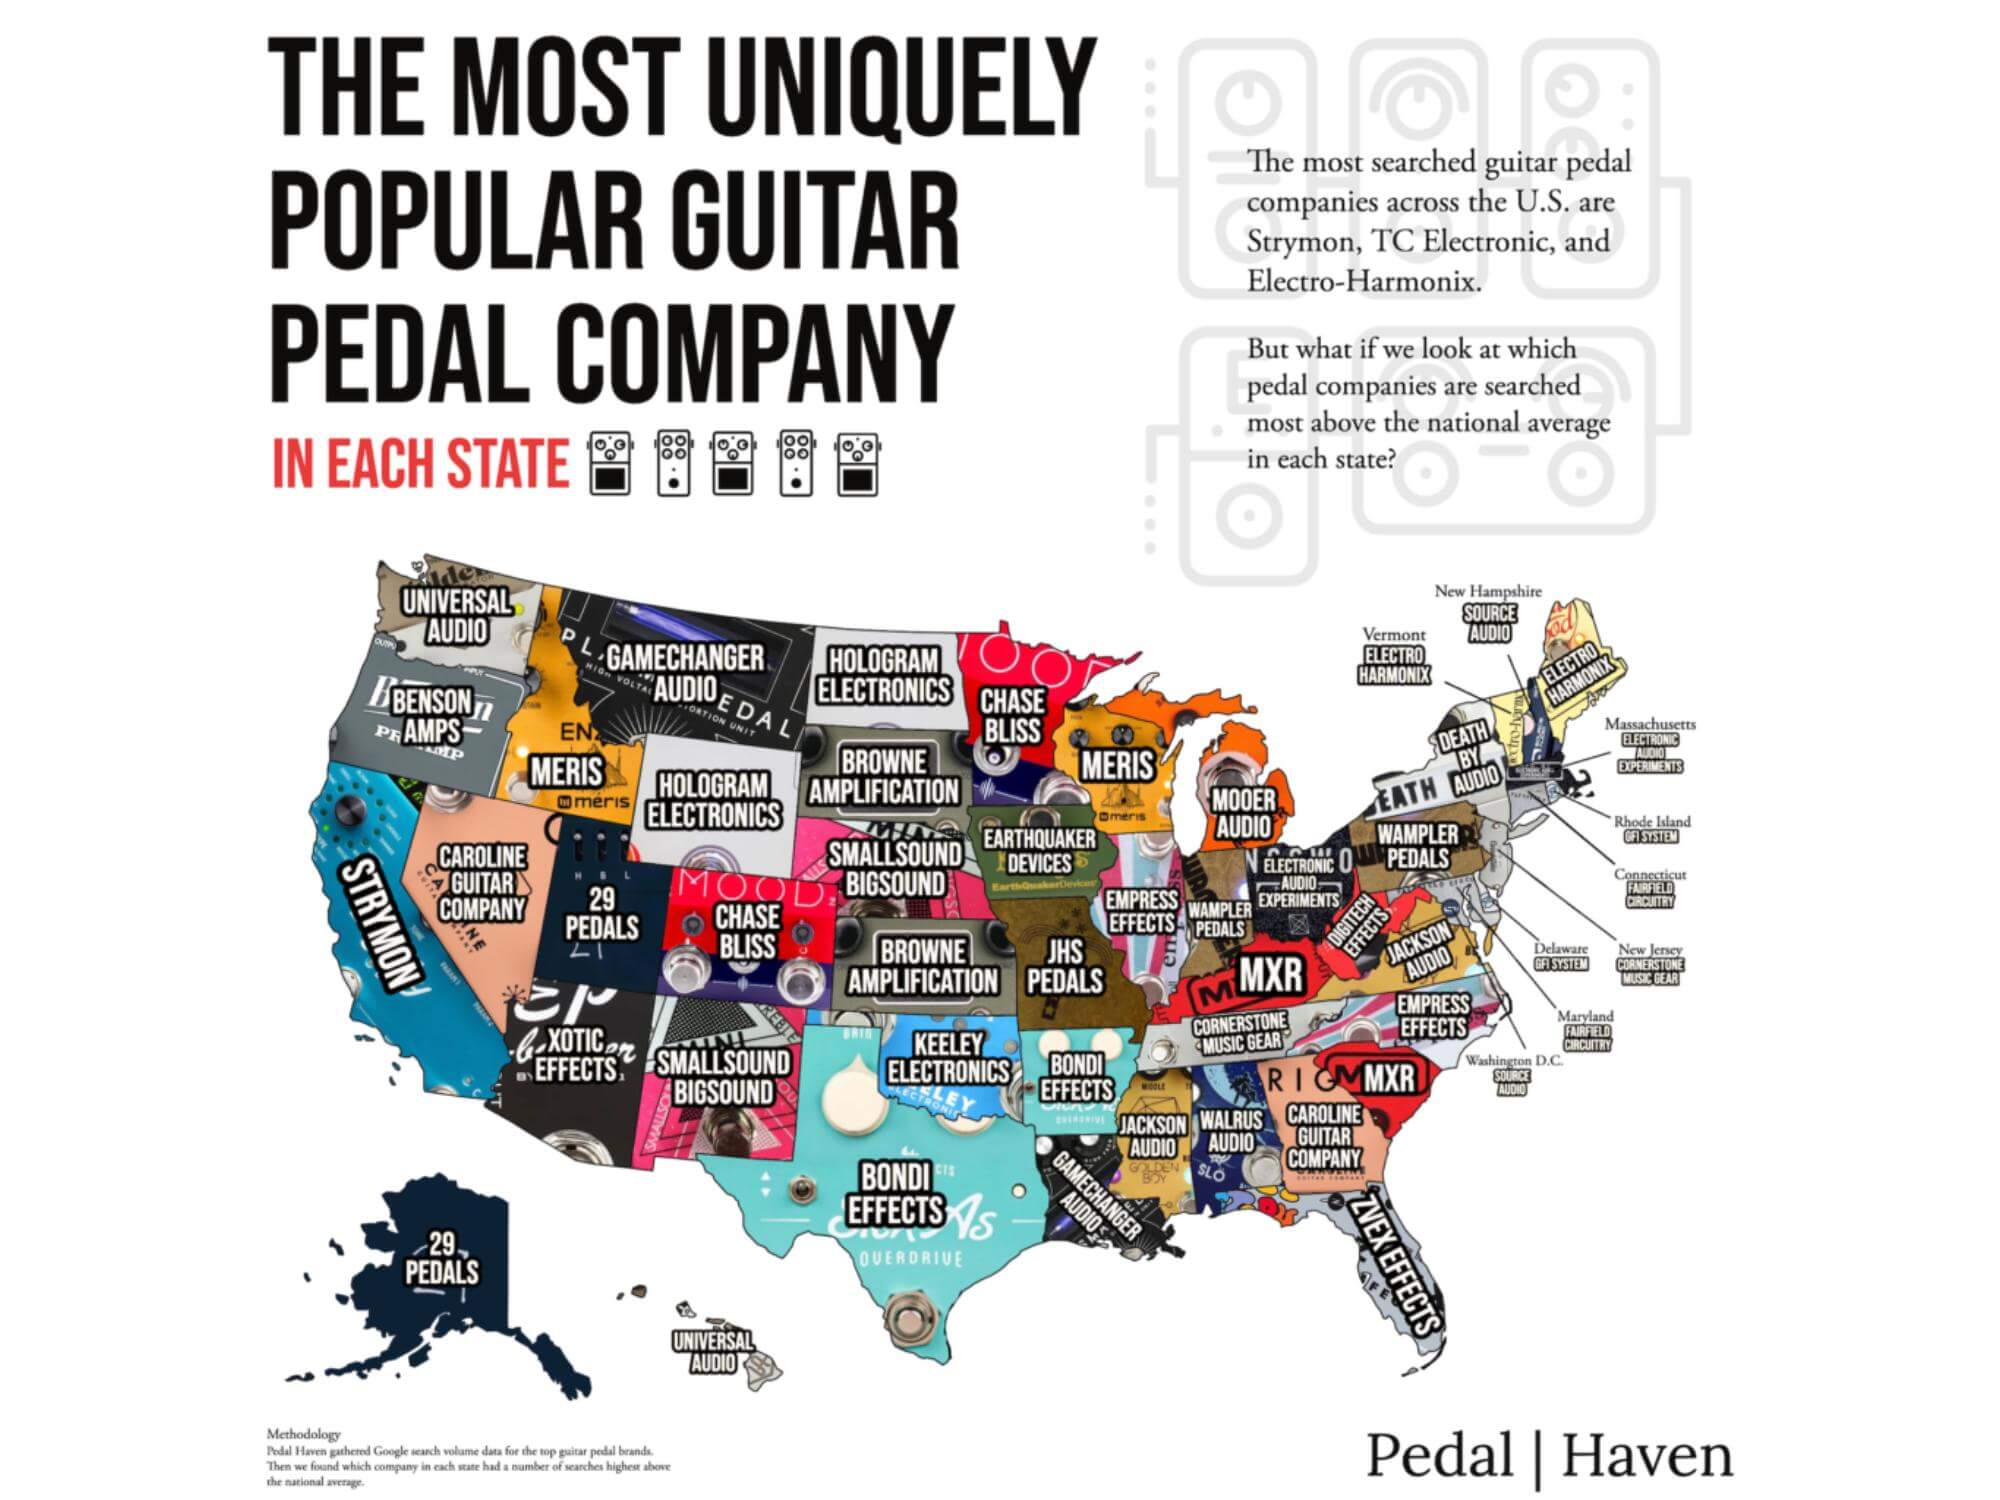 Most-searched pedals in US